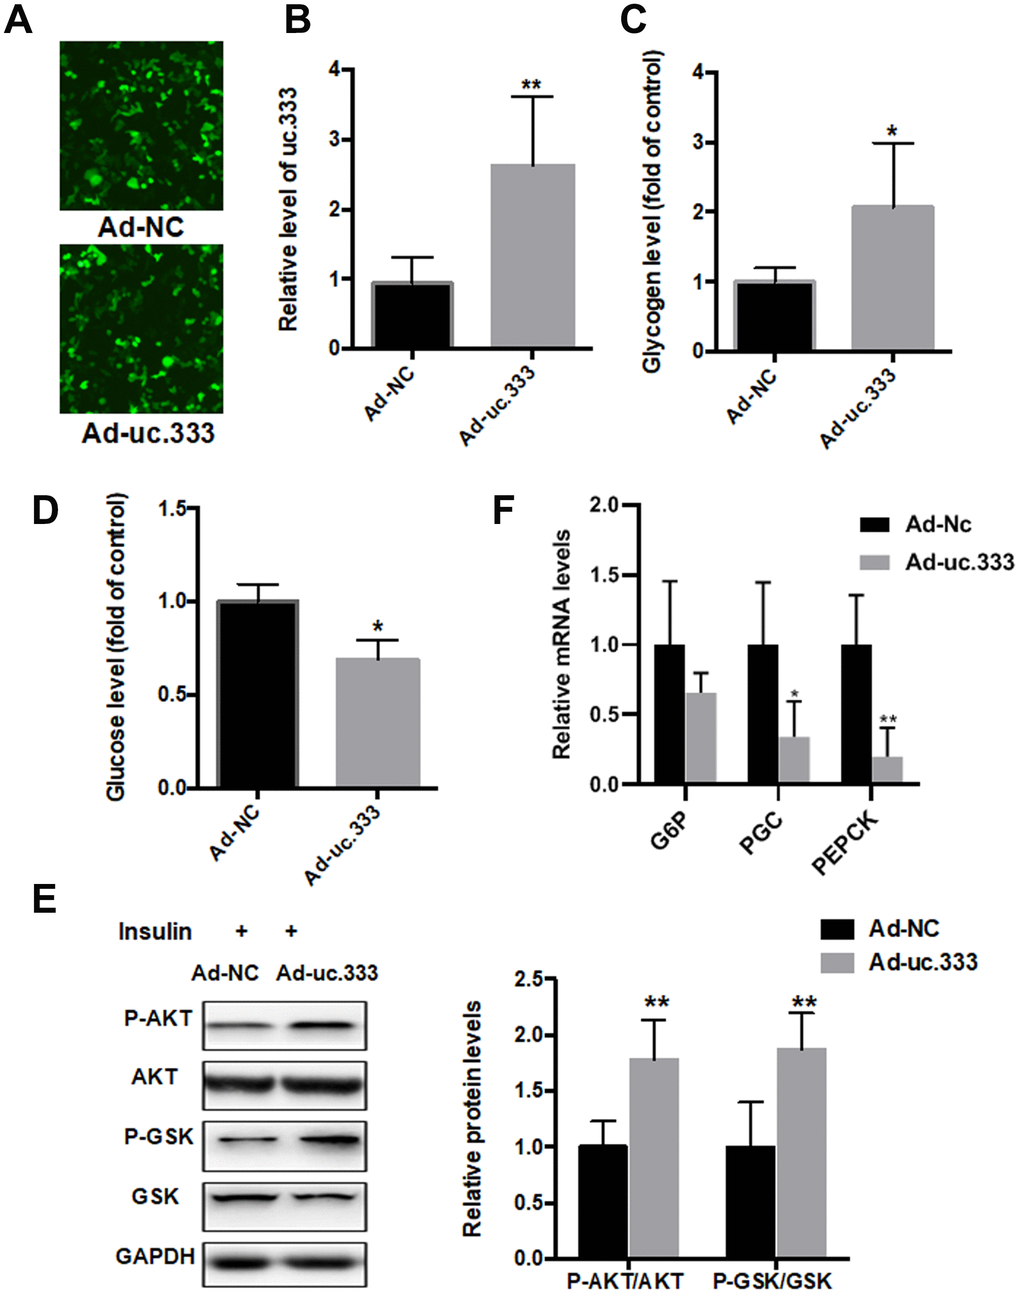 Overexpression of uc.333 ameliorated IR. (A) Immunofluorescence assay showed that Ad-NC or Ad-uc.333 transfected into HepG2 cells with equal transfection efficiency.(B) Level of uc.333 in the HepG2 cells transfected with Ad-uc.333 or Ad-NC for 48 h. (C) Glycogen content in HepG2 cells after transfection with Ad-uc.333 or Ad-NC for 48 h. (D) Expression of glucose in HepG2 cells transfected with Ad-uc.333m or Ad-NC for 48 h. (E) Protein levels of P-AKT, AKT, P-GSK, GSK, and GAPDH in HepG2 cells transfected with Ad- uc.3333 or Ad-NC for 48 h, as analyzed using Western blot. (F) The mRNA levels of G6Pase, PGC-1α and PEPKC were also decreased after overexpression of uc.333 compared with that of Ad-NC Data are mean ± SEM; *P P P 